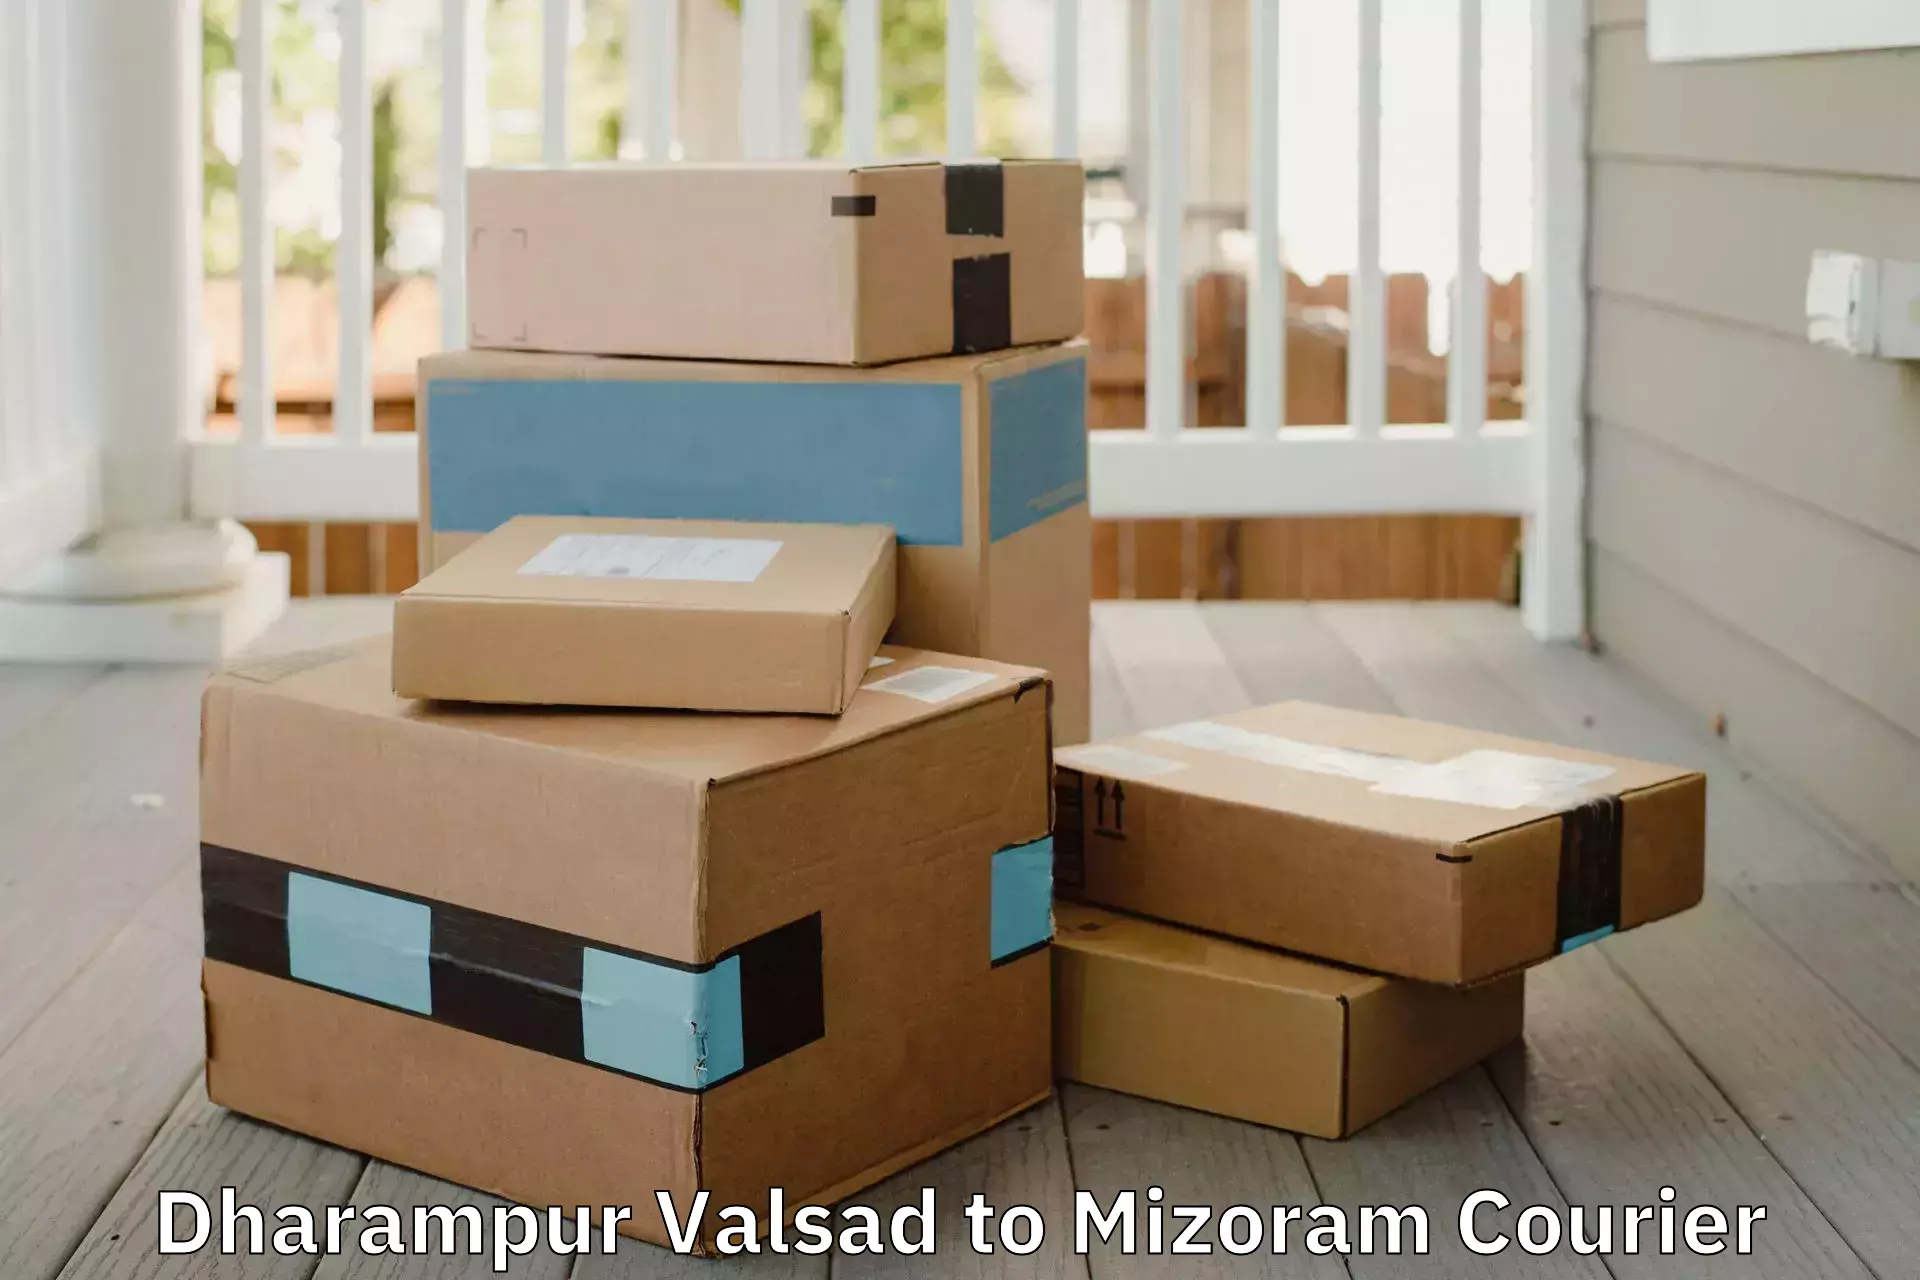 Furniture transport experts Dharampur Valsad to Siaha